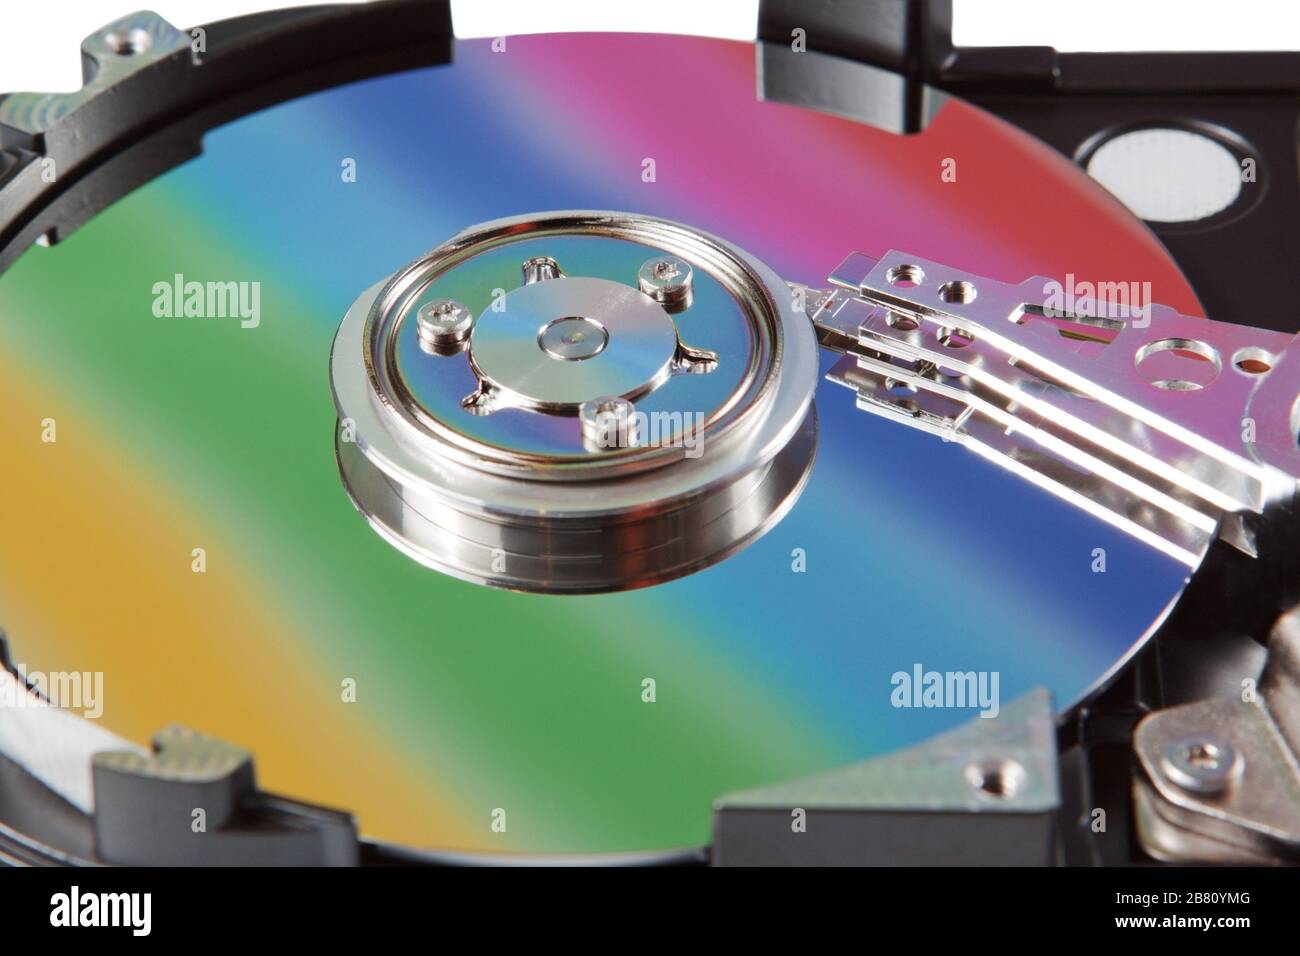 Opened hard drive with a color reflection Stock Photo